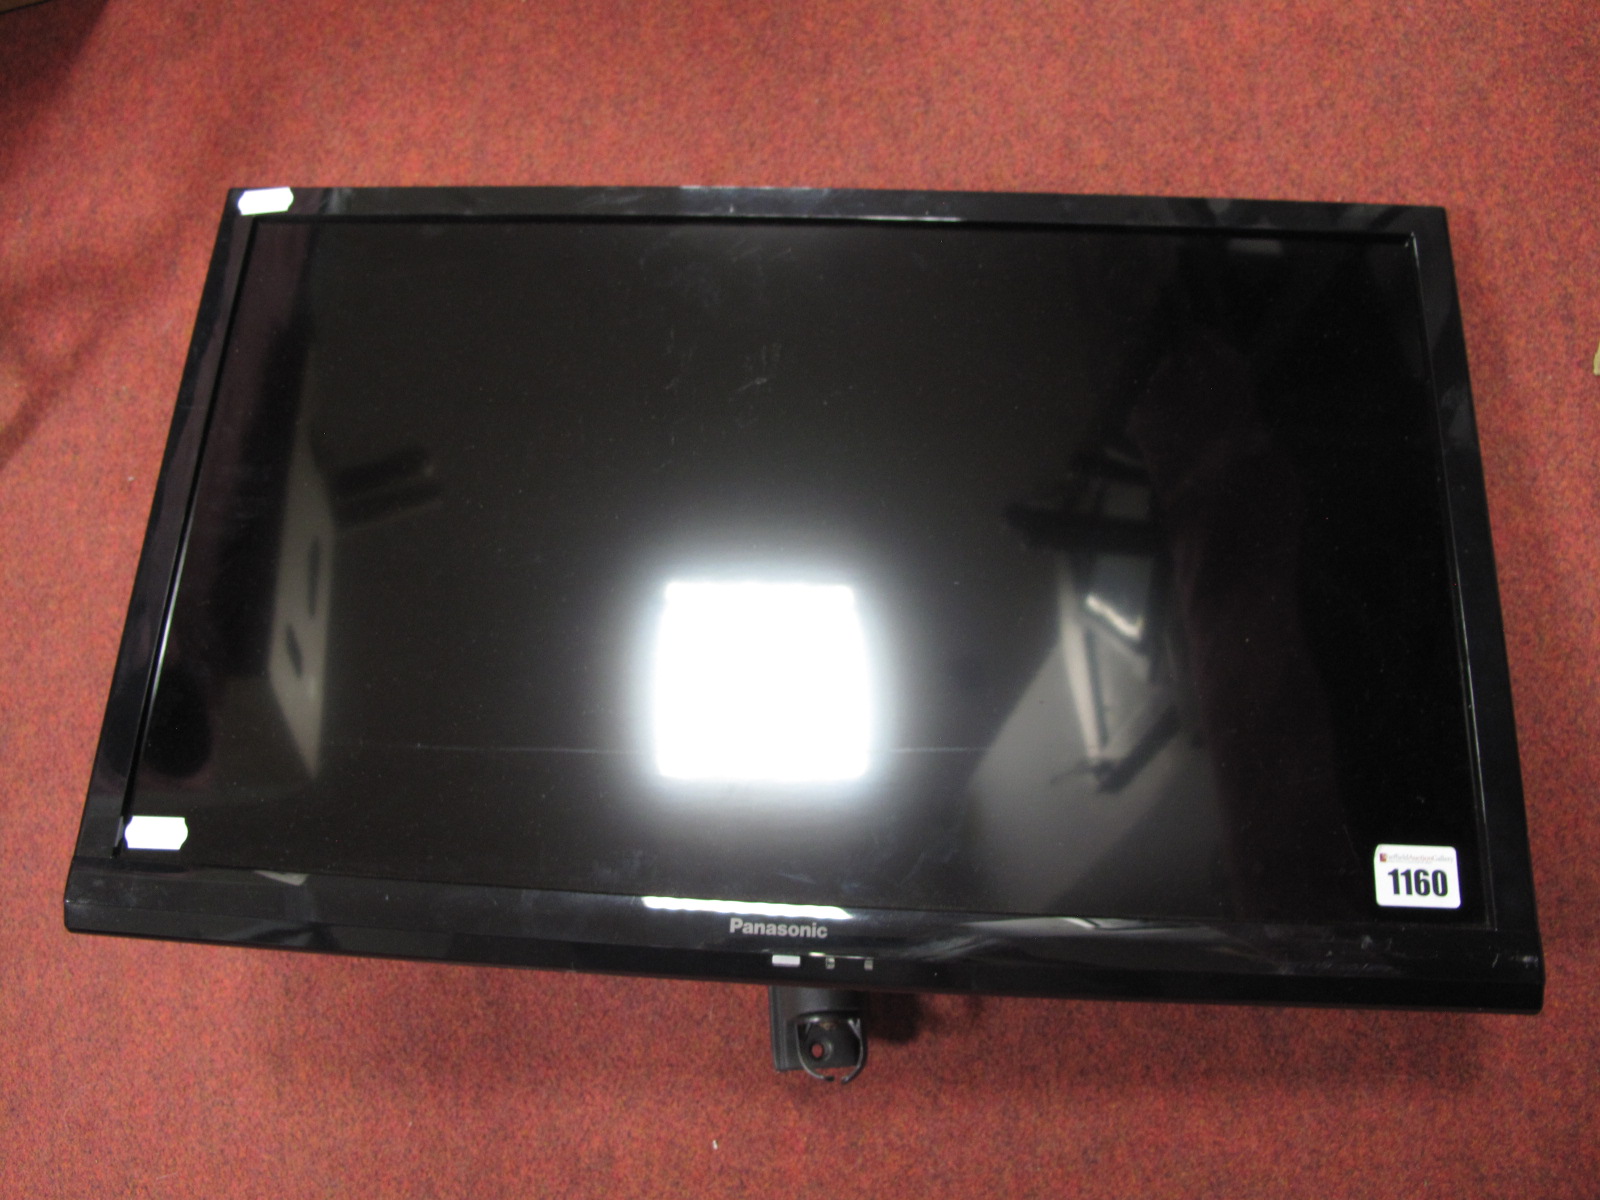 A Panasonic 24" LCD TV, model TX-24ASS10B - fitted for wall mounting, no stand.